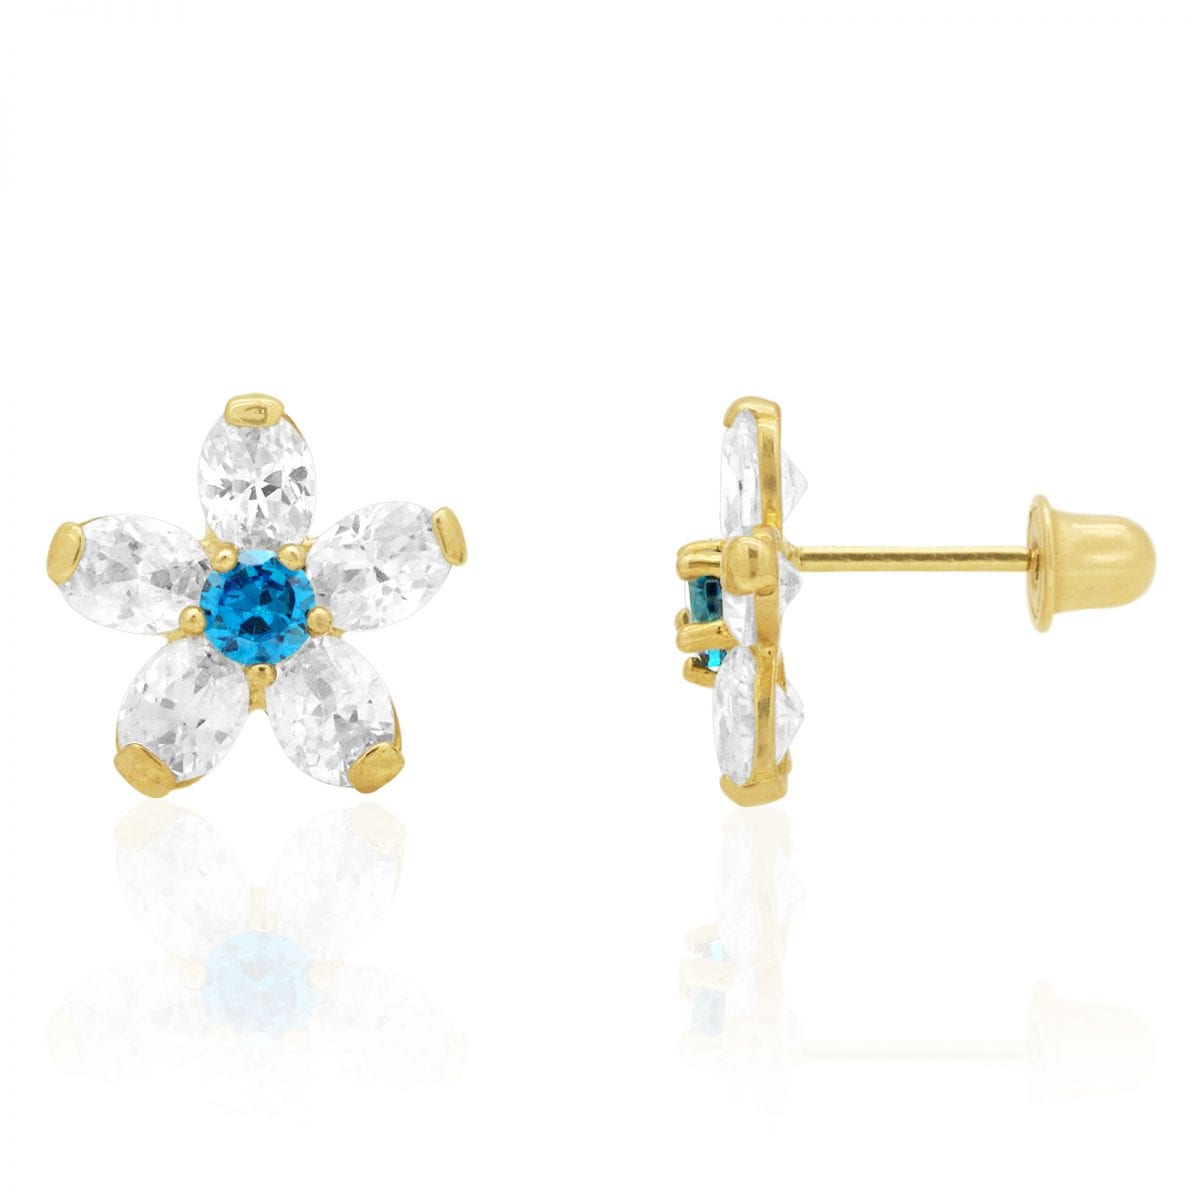 14k Yellow Gold Simulated Diamond And Blue Topaz Flower Screwback Stud Earrings